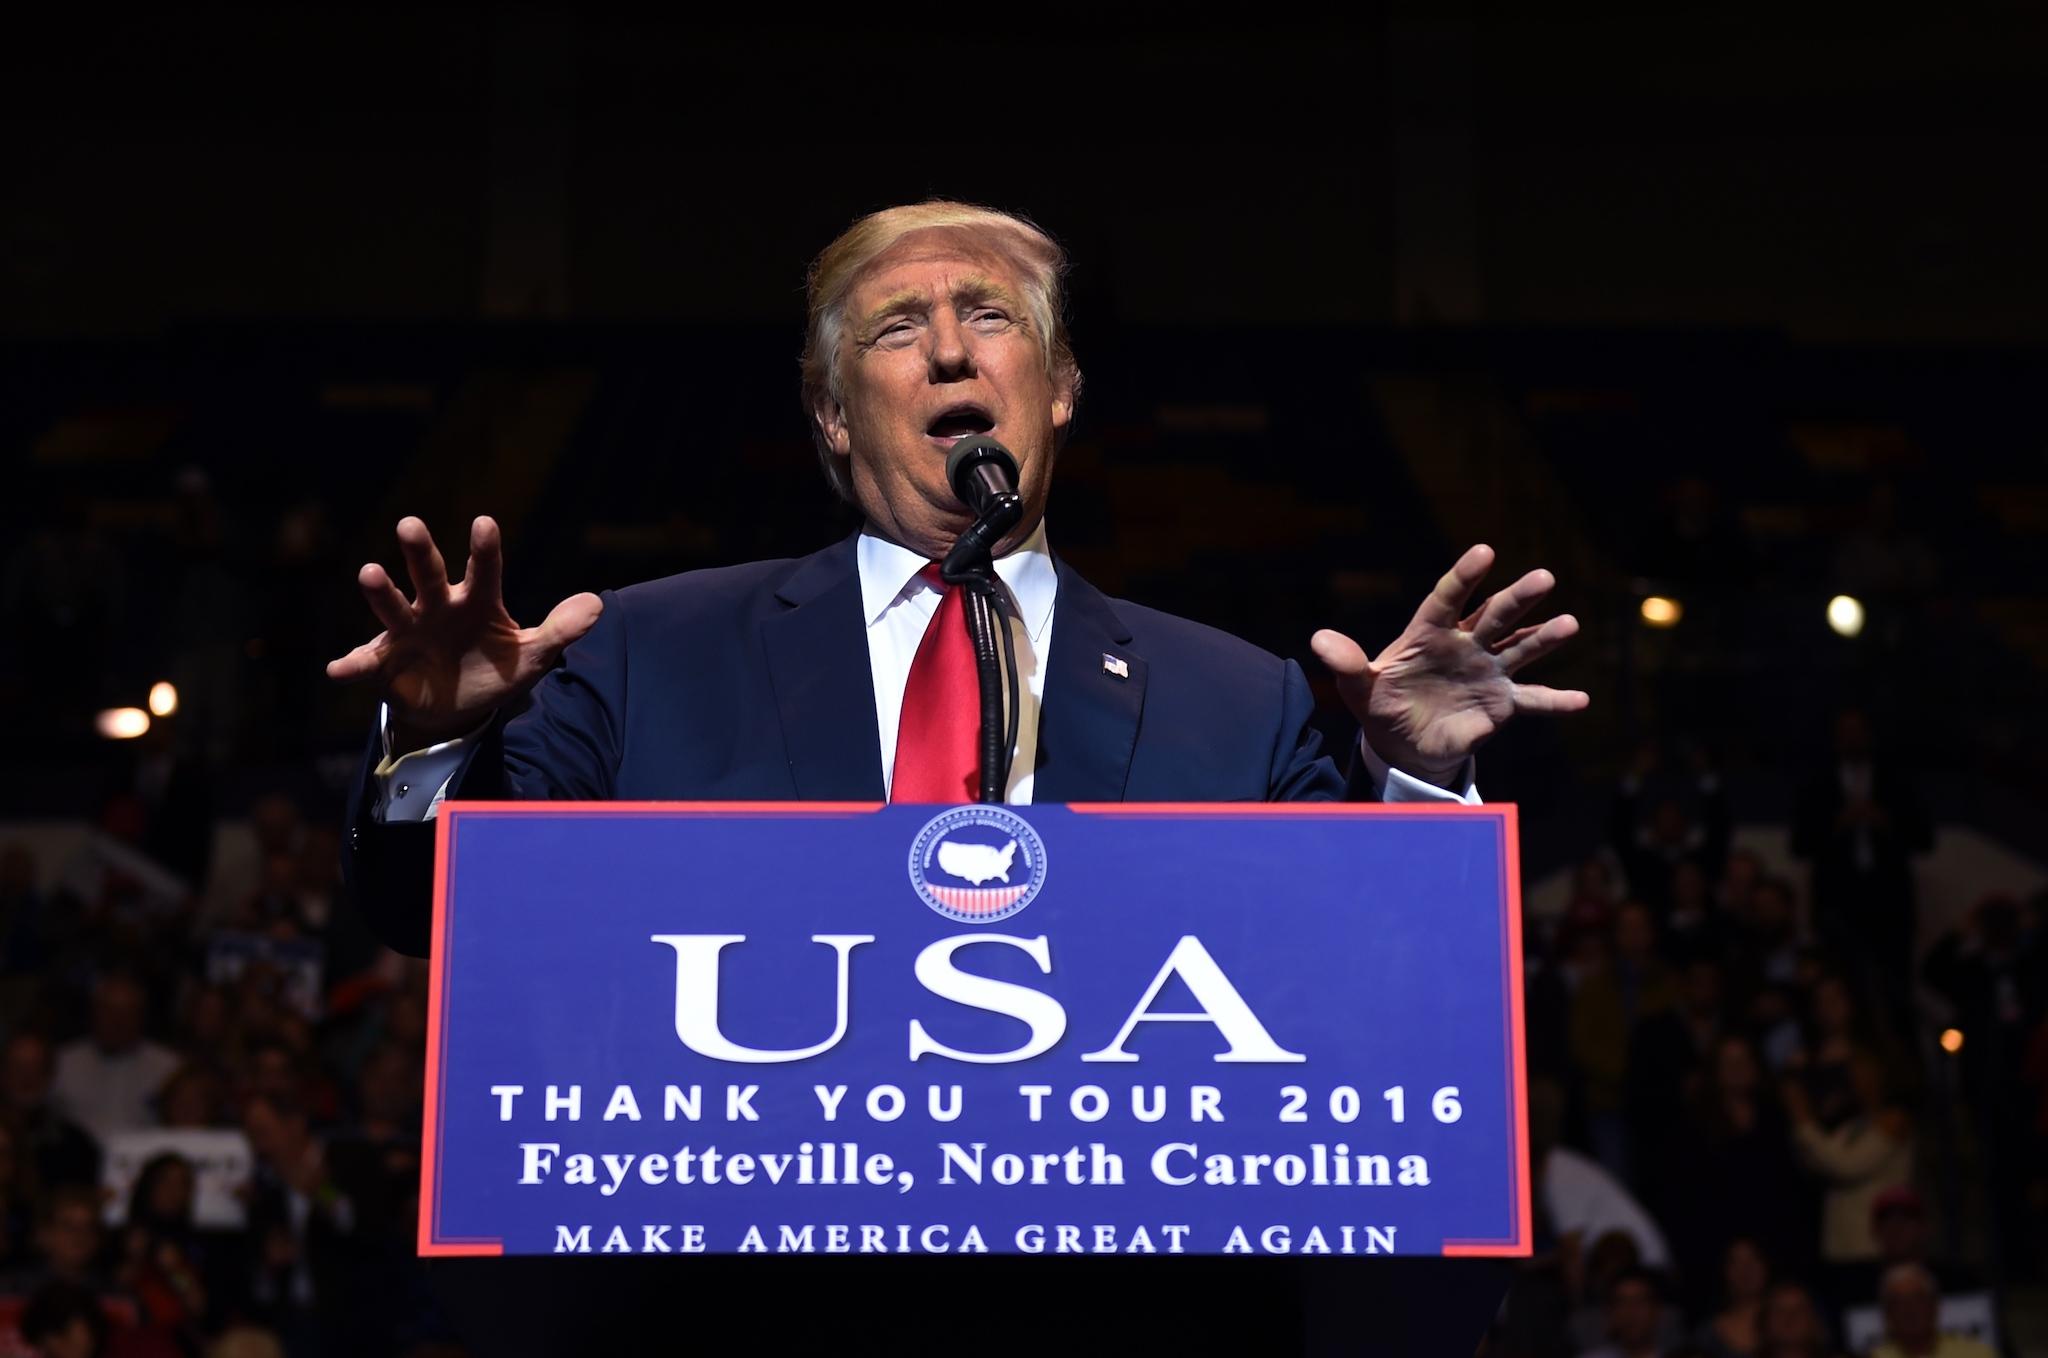 US President-elect Donald Trump speaks at the Crown Coliseum in Fayetteville, North Carolina on December 6, 2016 during his USA Thank You Tour